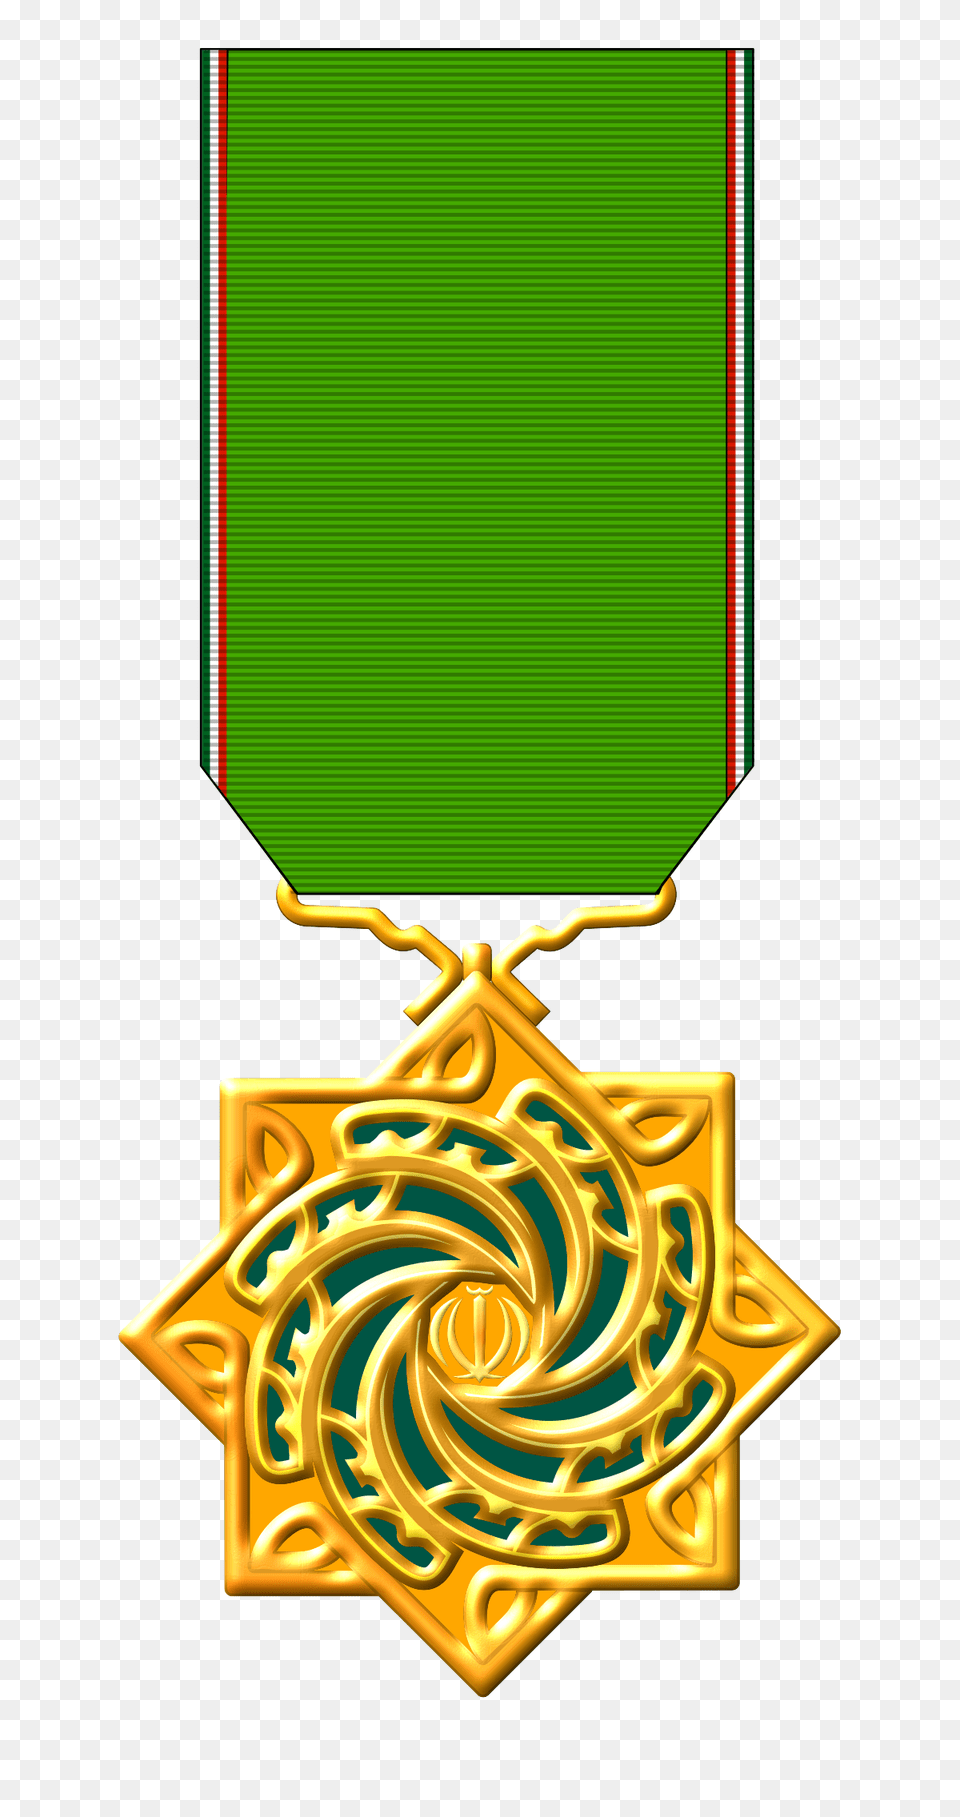 Order Of Merit And Management, Gold, Accessories Png Image